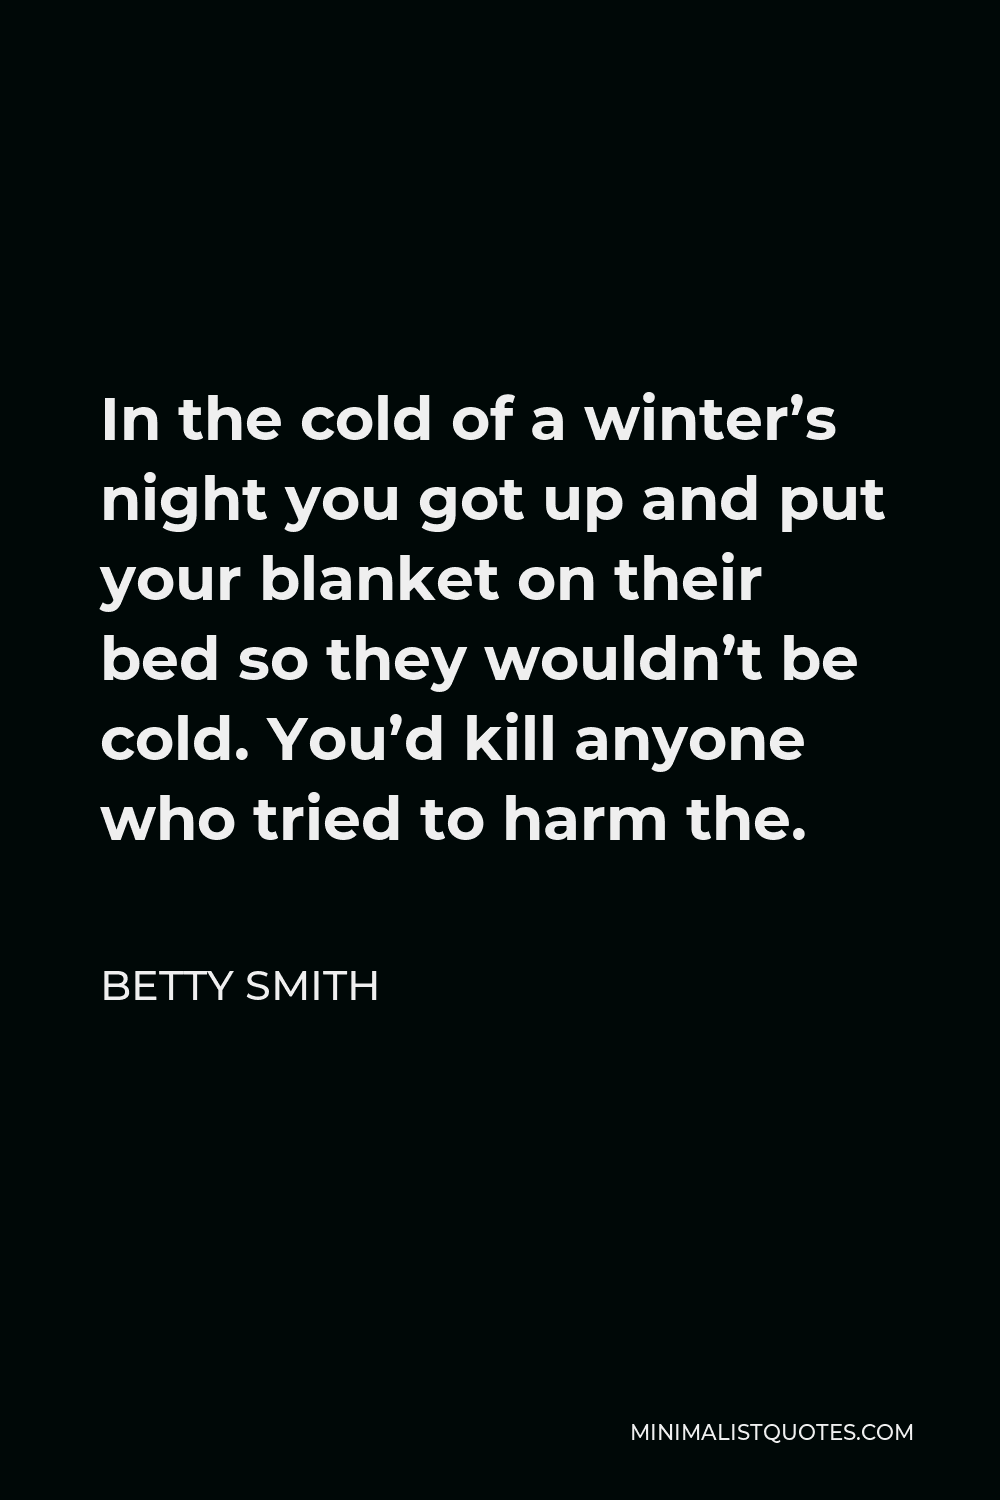 Betty Smith Quote - In the cold of a winter’s night you got up and put your blanket on their bed so they wouldn’t be cold. You’d kill anyone who tried to harm the.